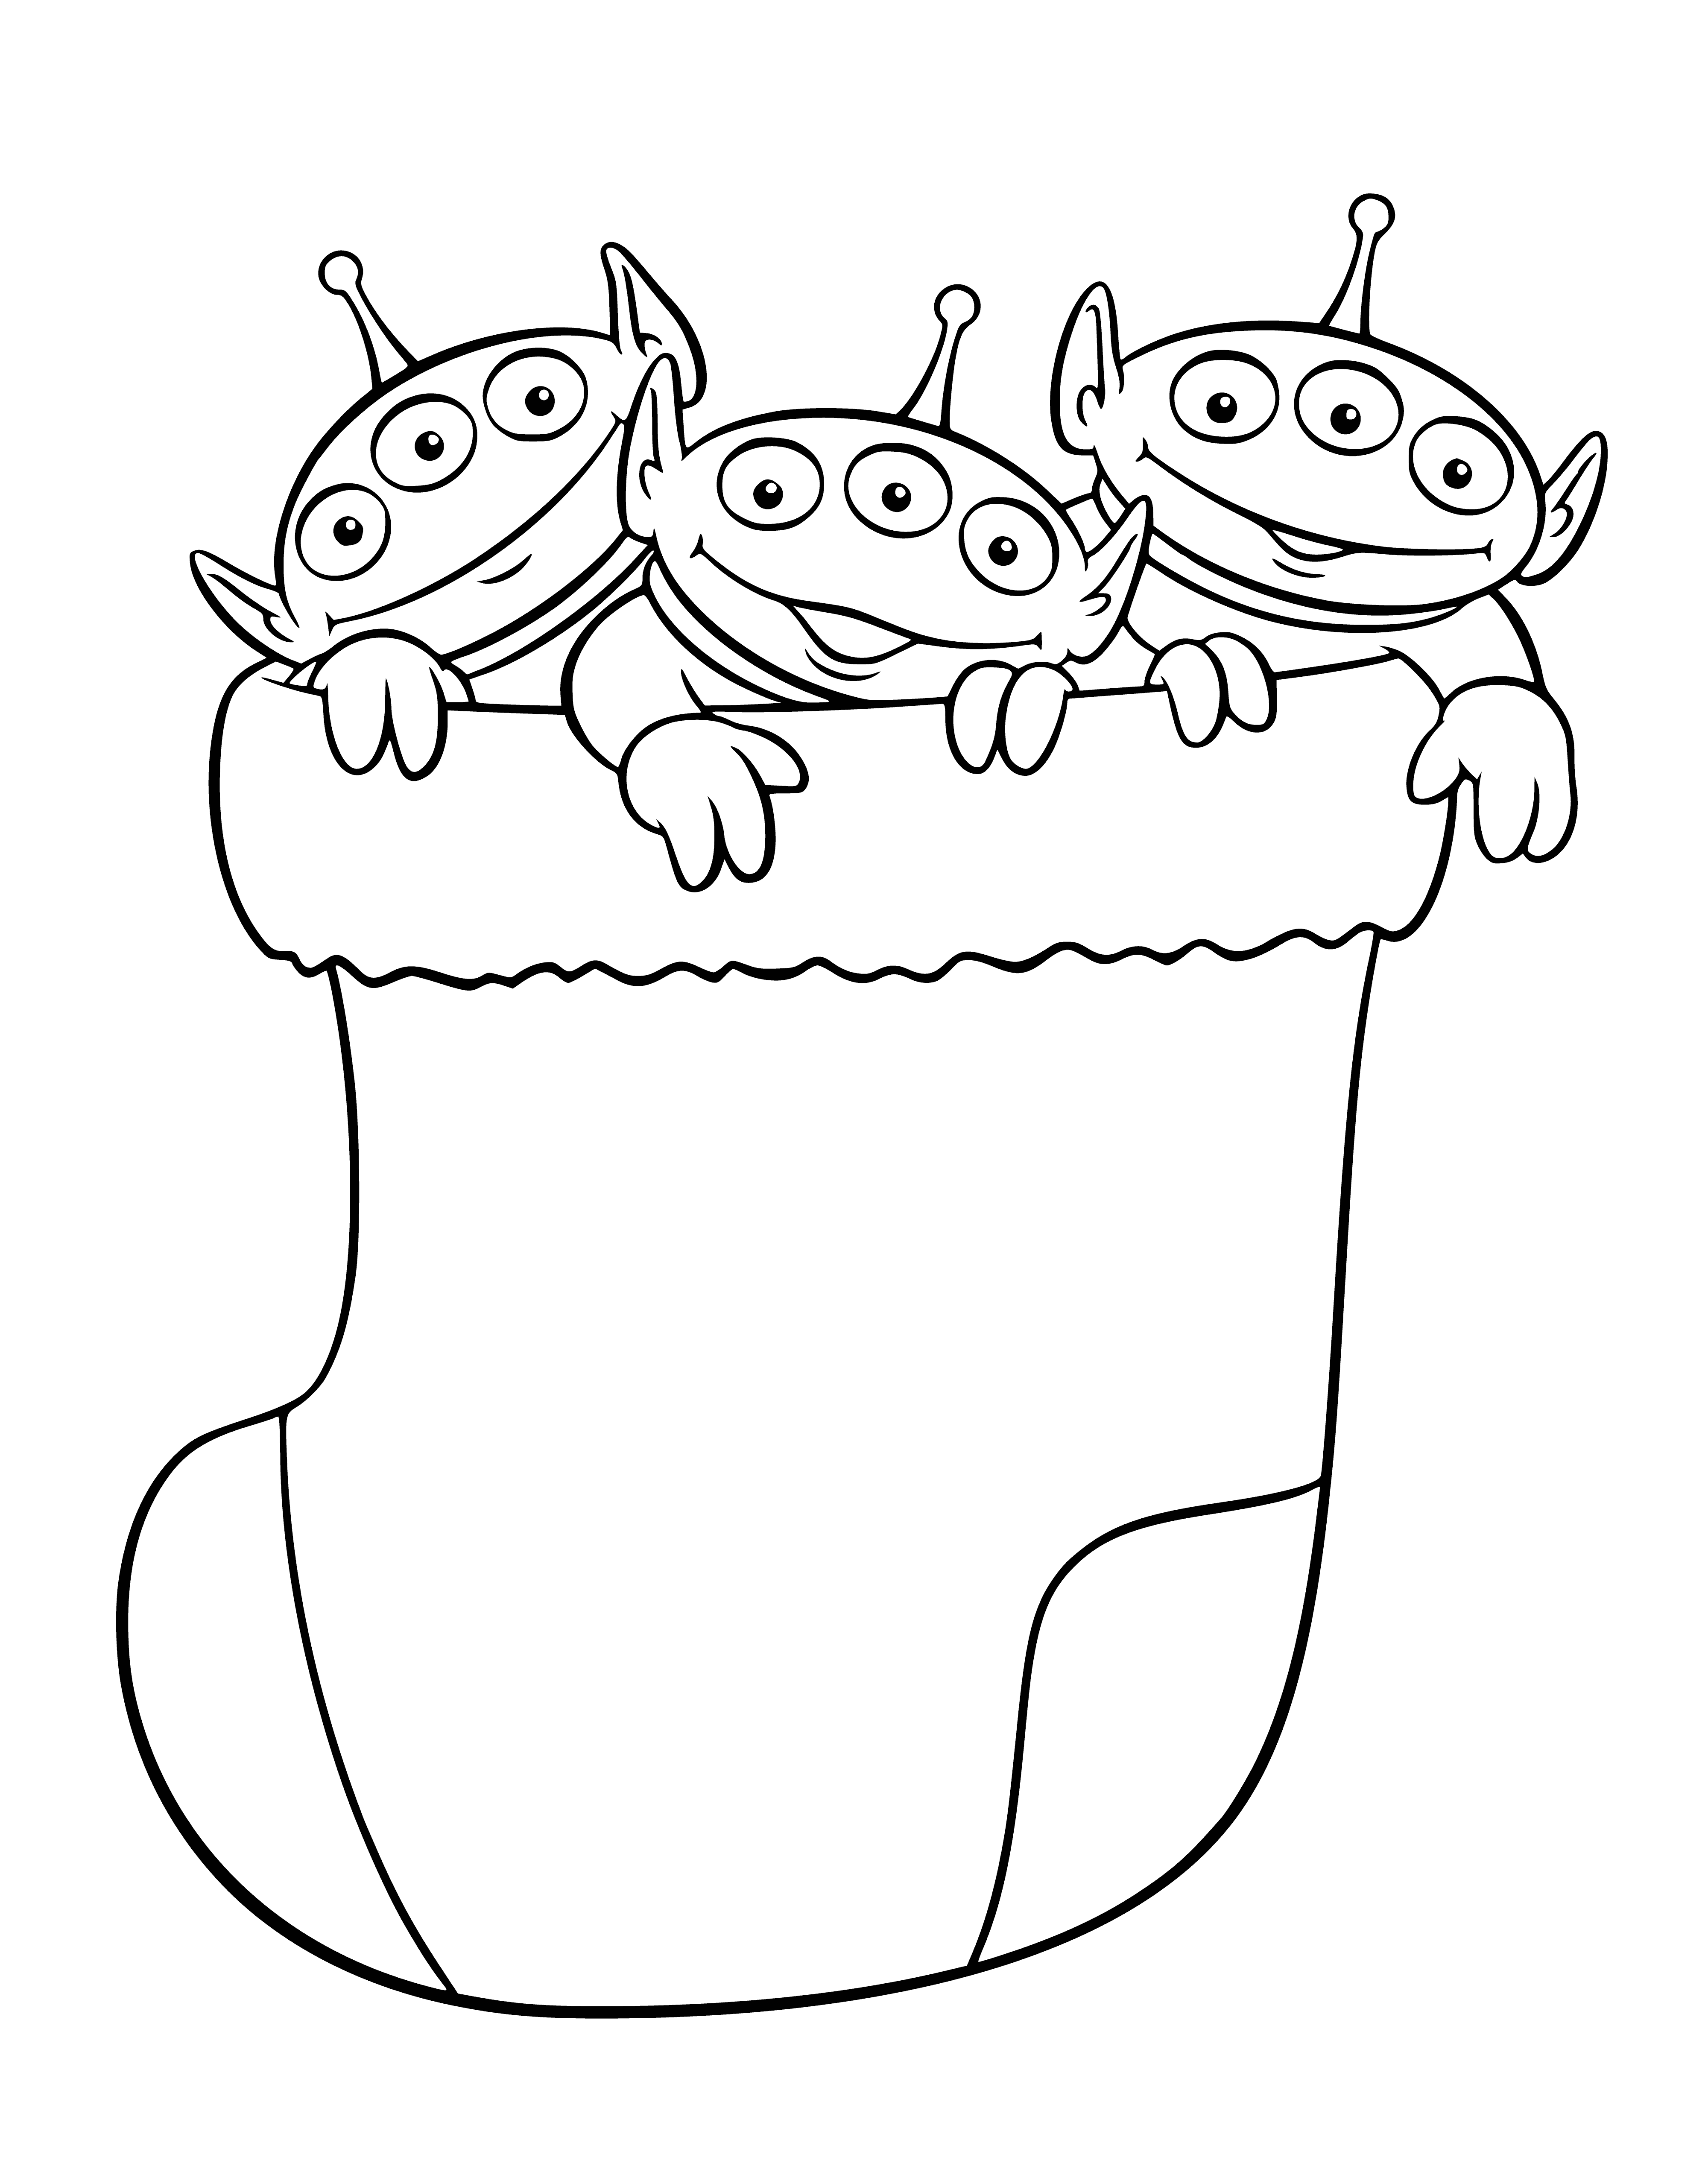 coloring page: Disney characters celebrate New Year with a Christmas sock. They are all excited! #happynewyear